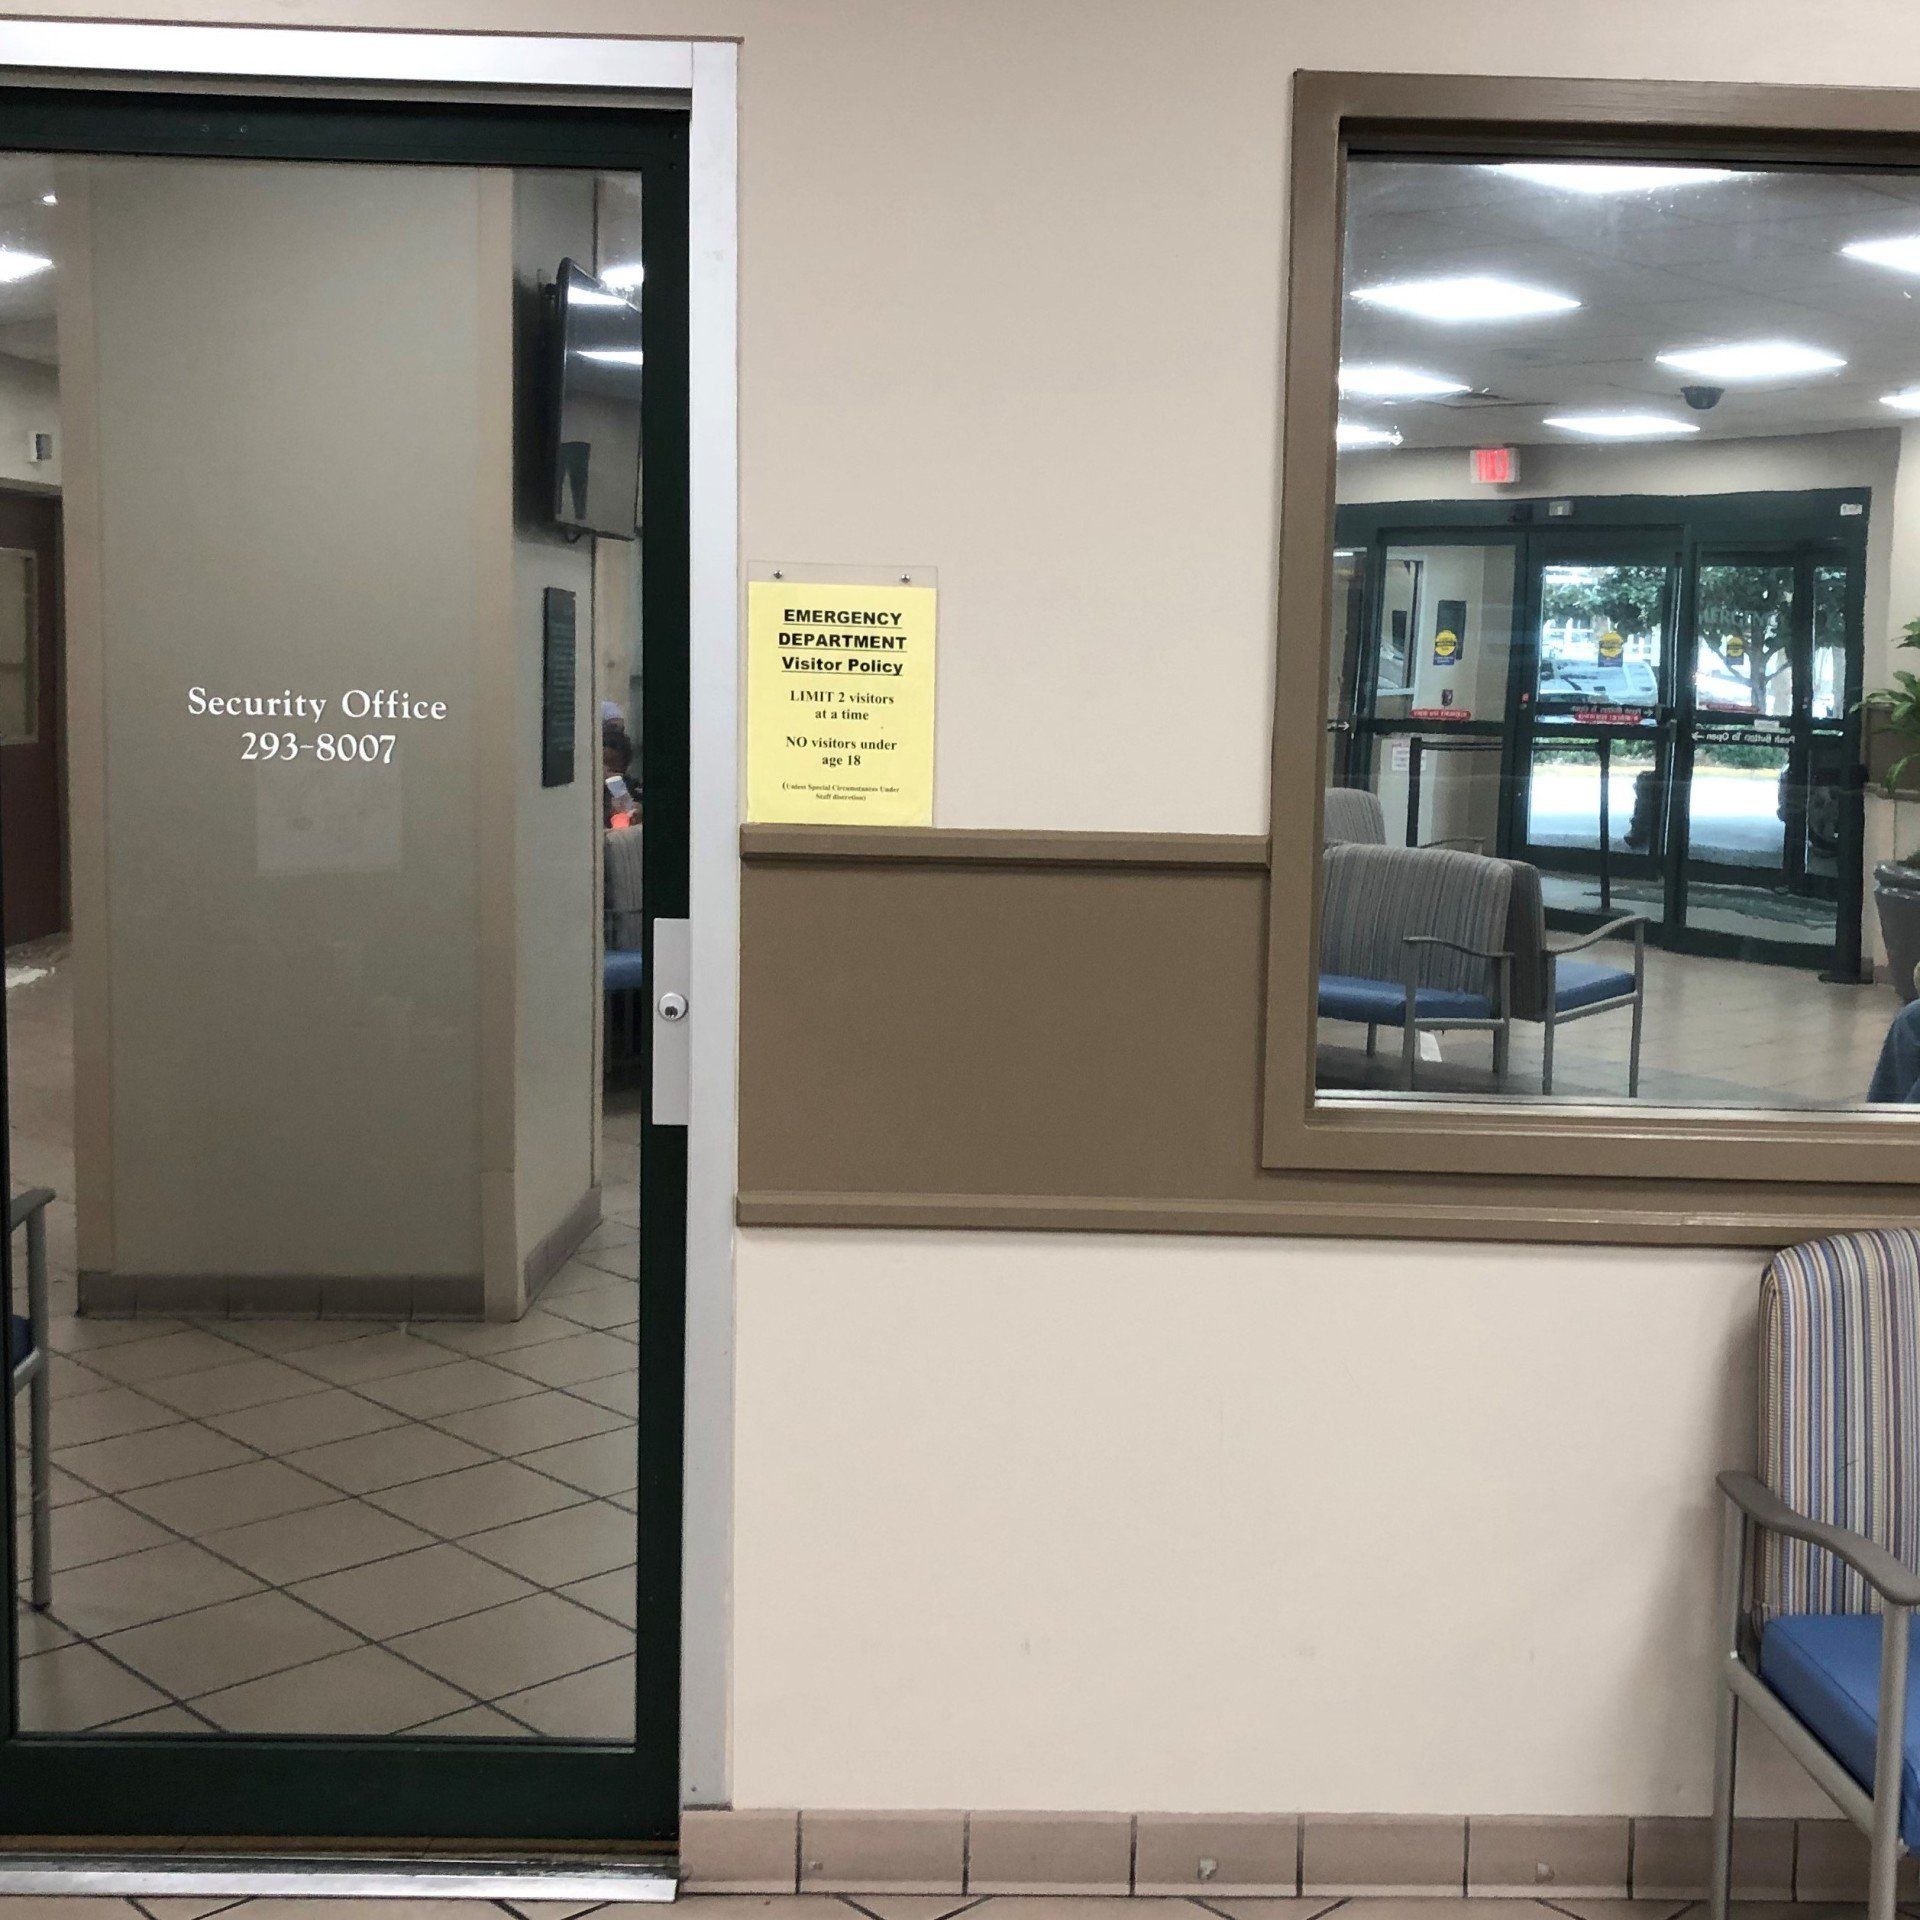 Interior office glass and window tinting for privacy - 1-way mirror tint installed to security office at Jackson Hospital on 2.14.2019